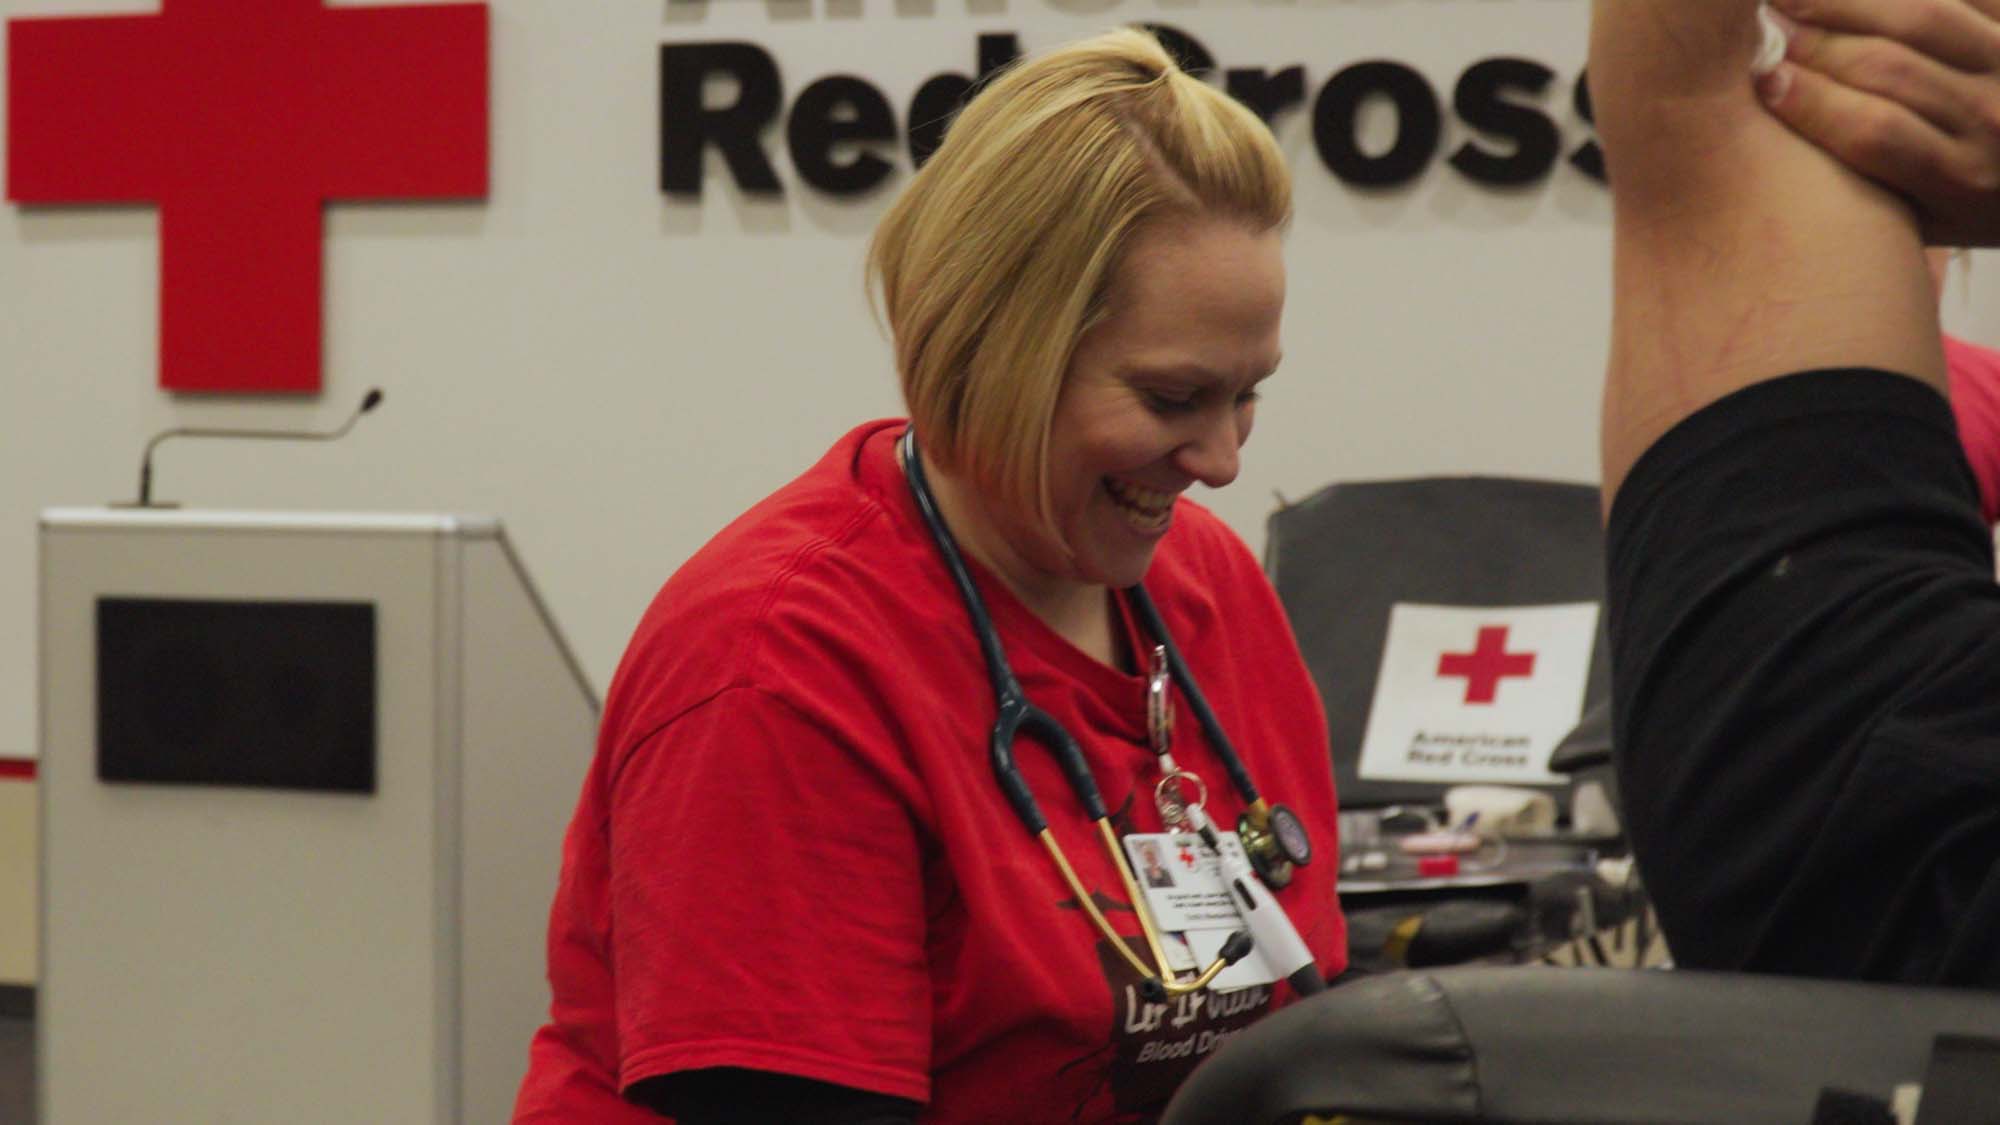 A Red Cross volunteer draws blood from a donor.